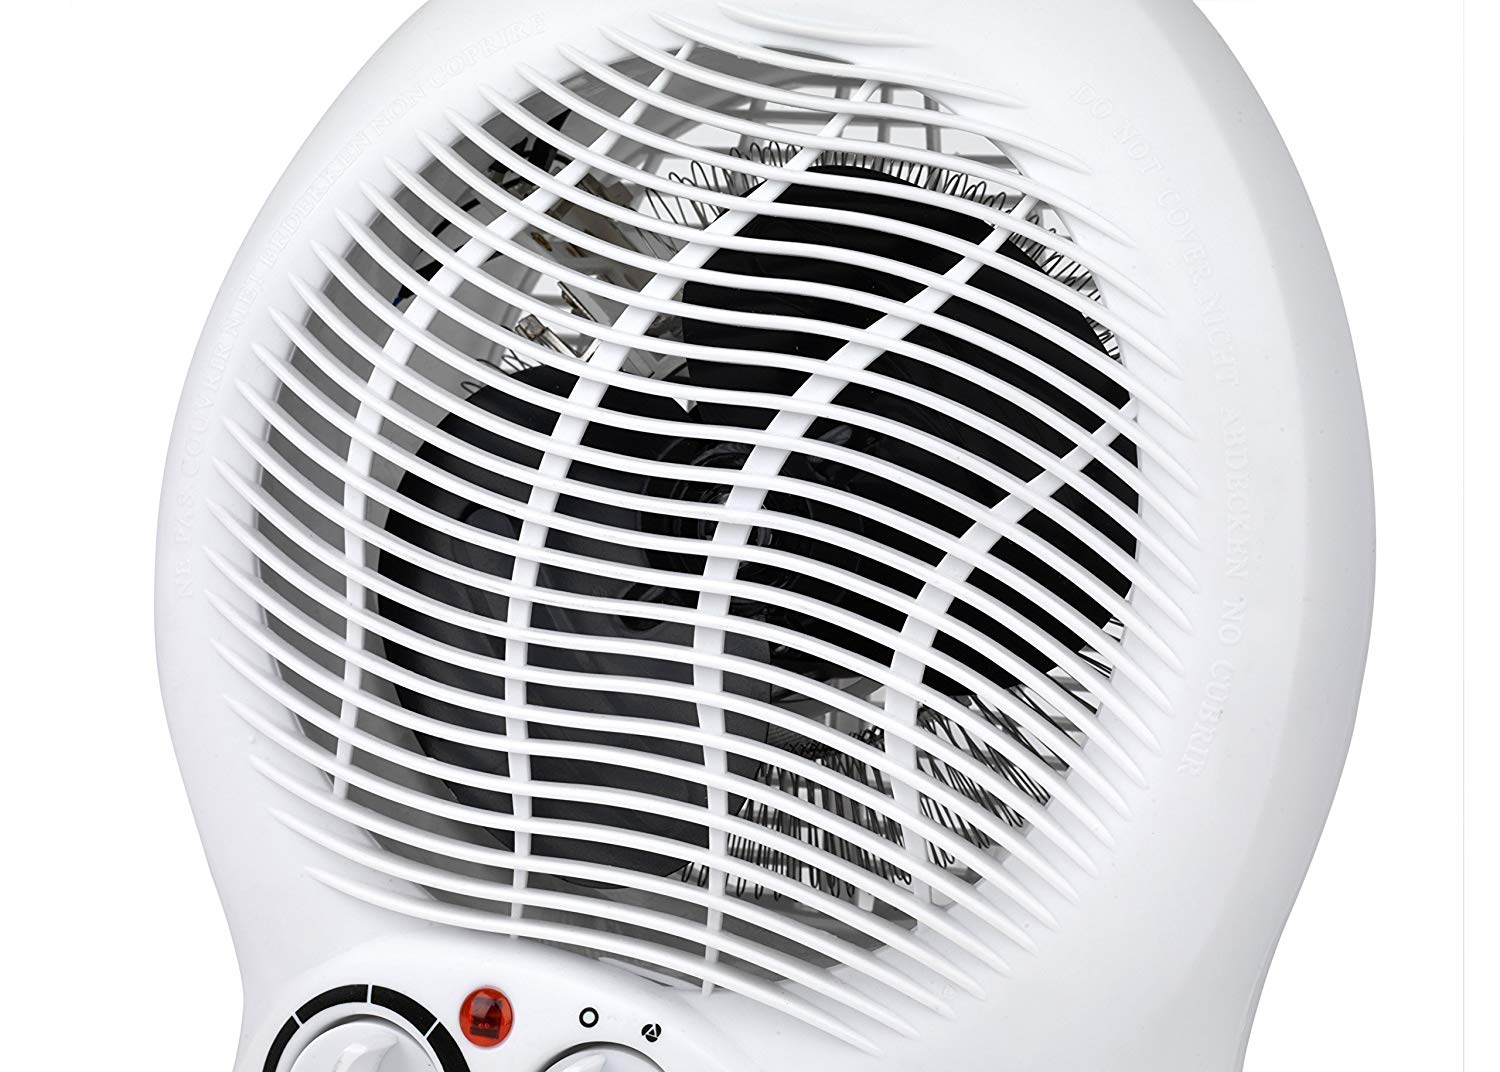 Beldray EH0567WK, Fan Heaters Reviews and Comments